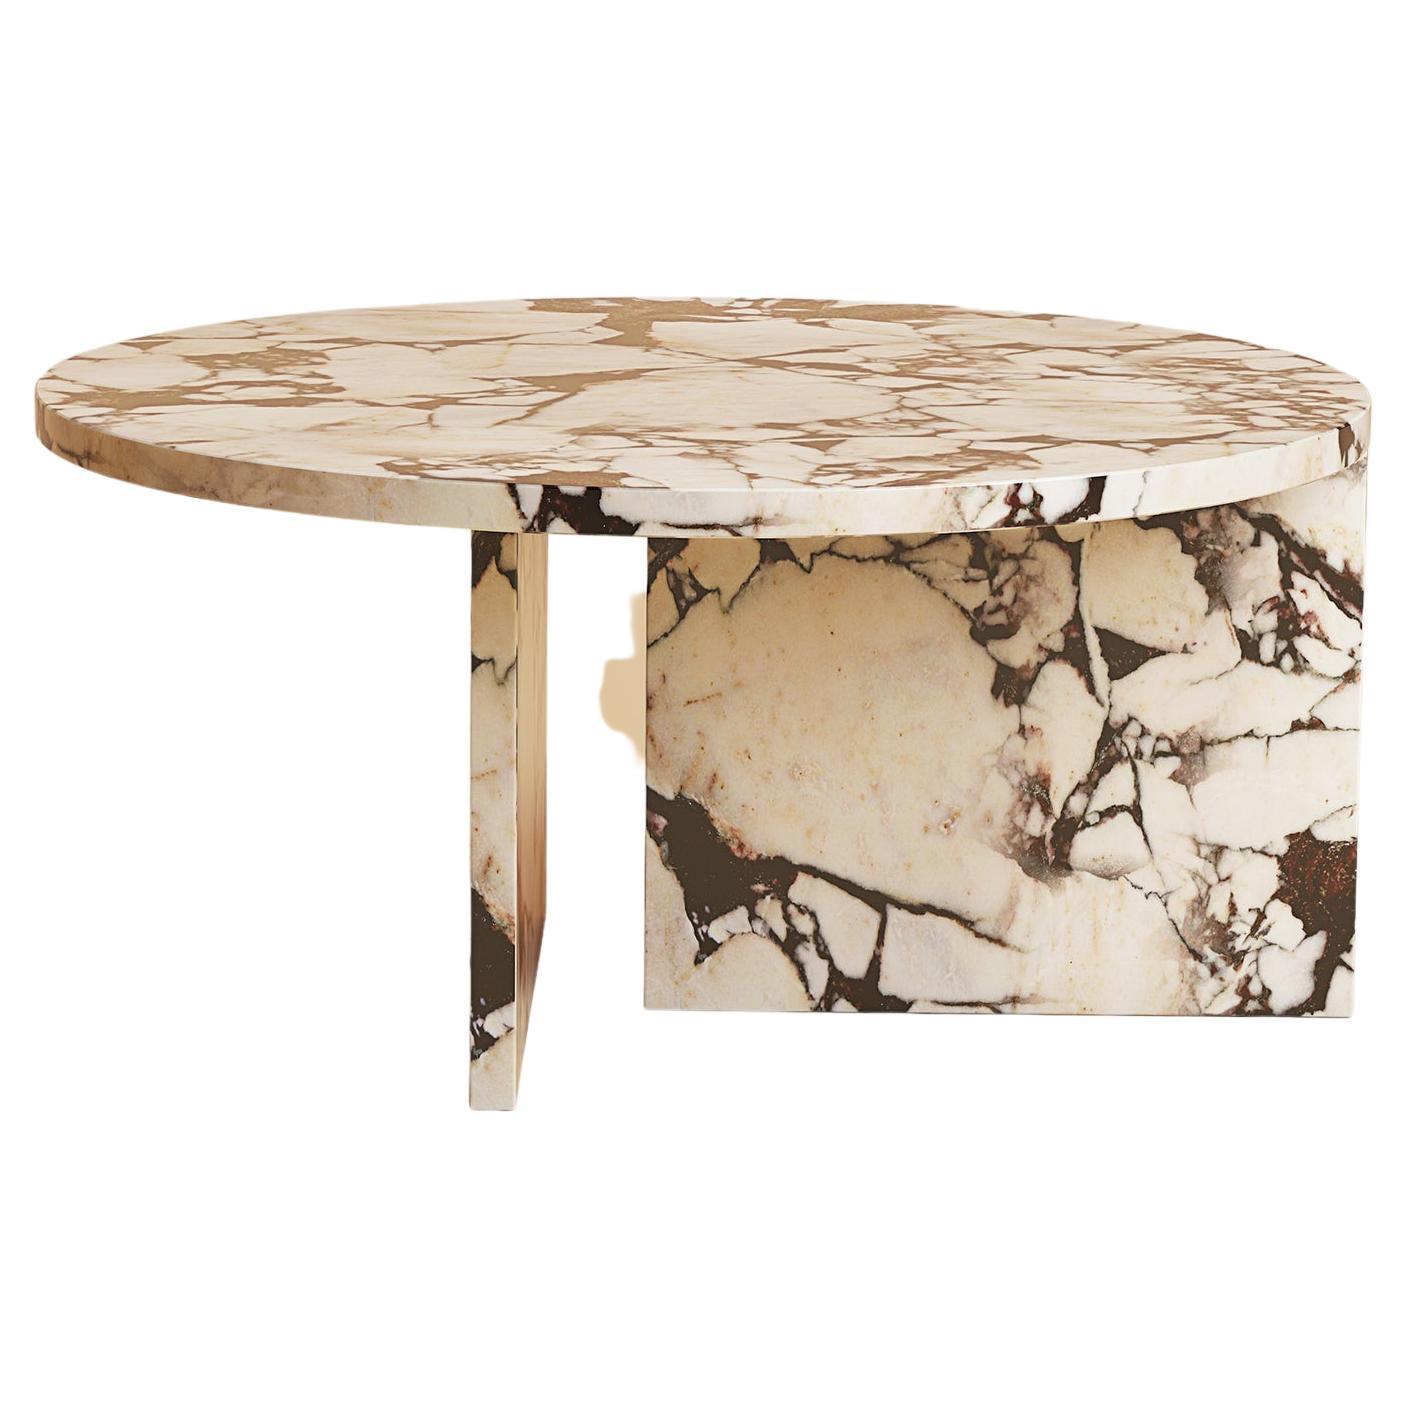 Calacatta Violet Marble Round Coffee Table, Made in Italy For Sale